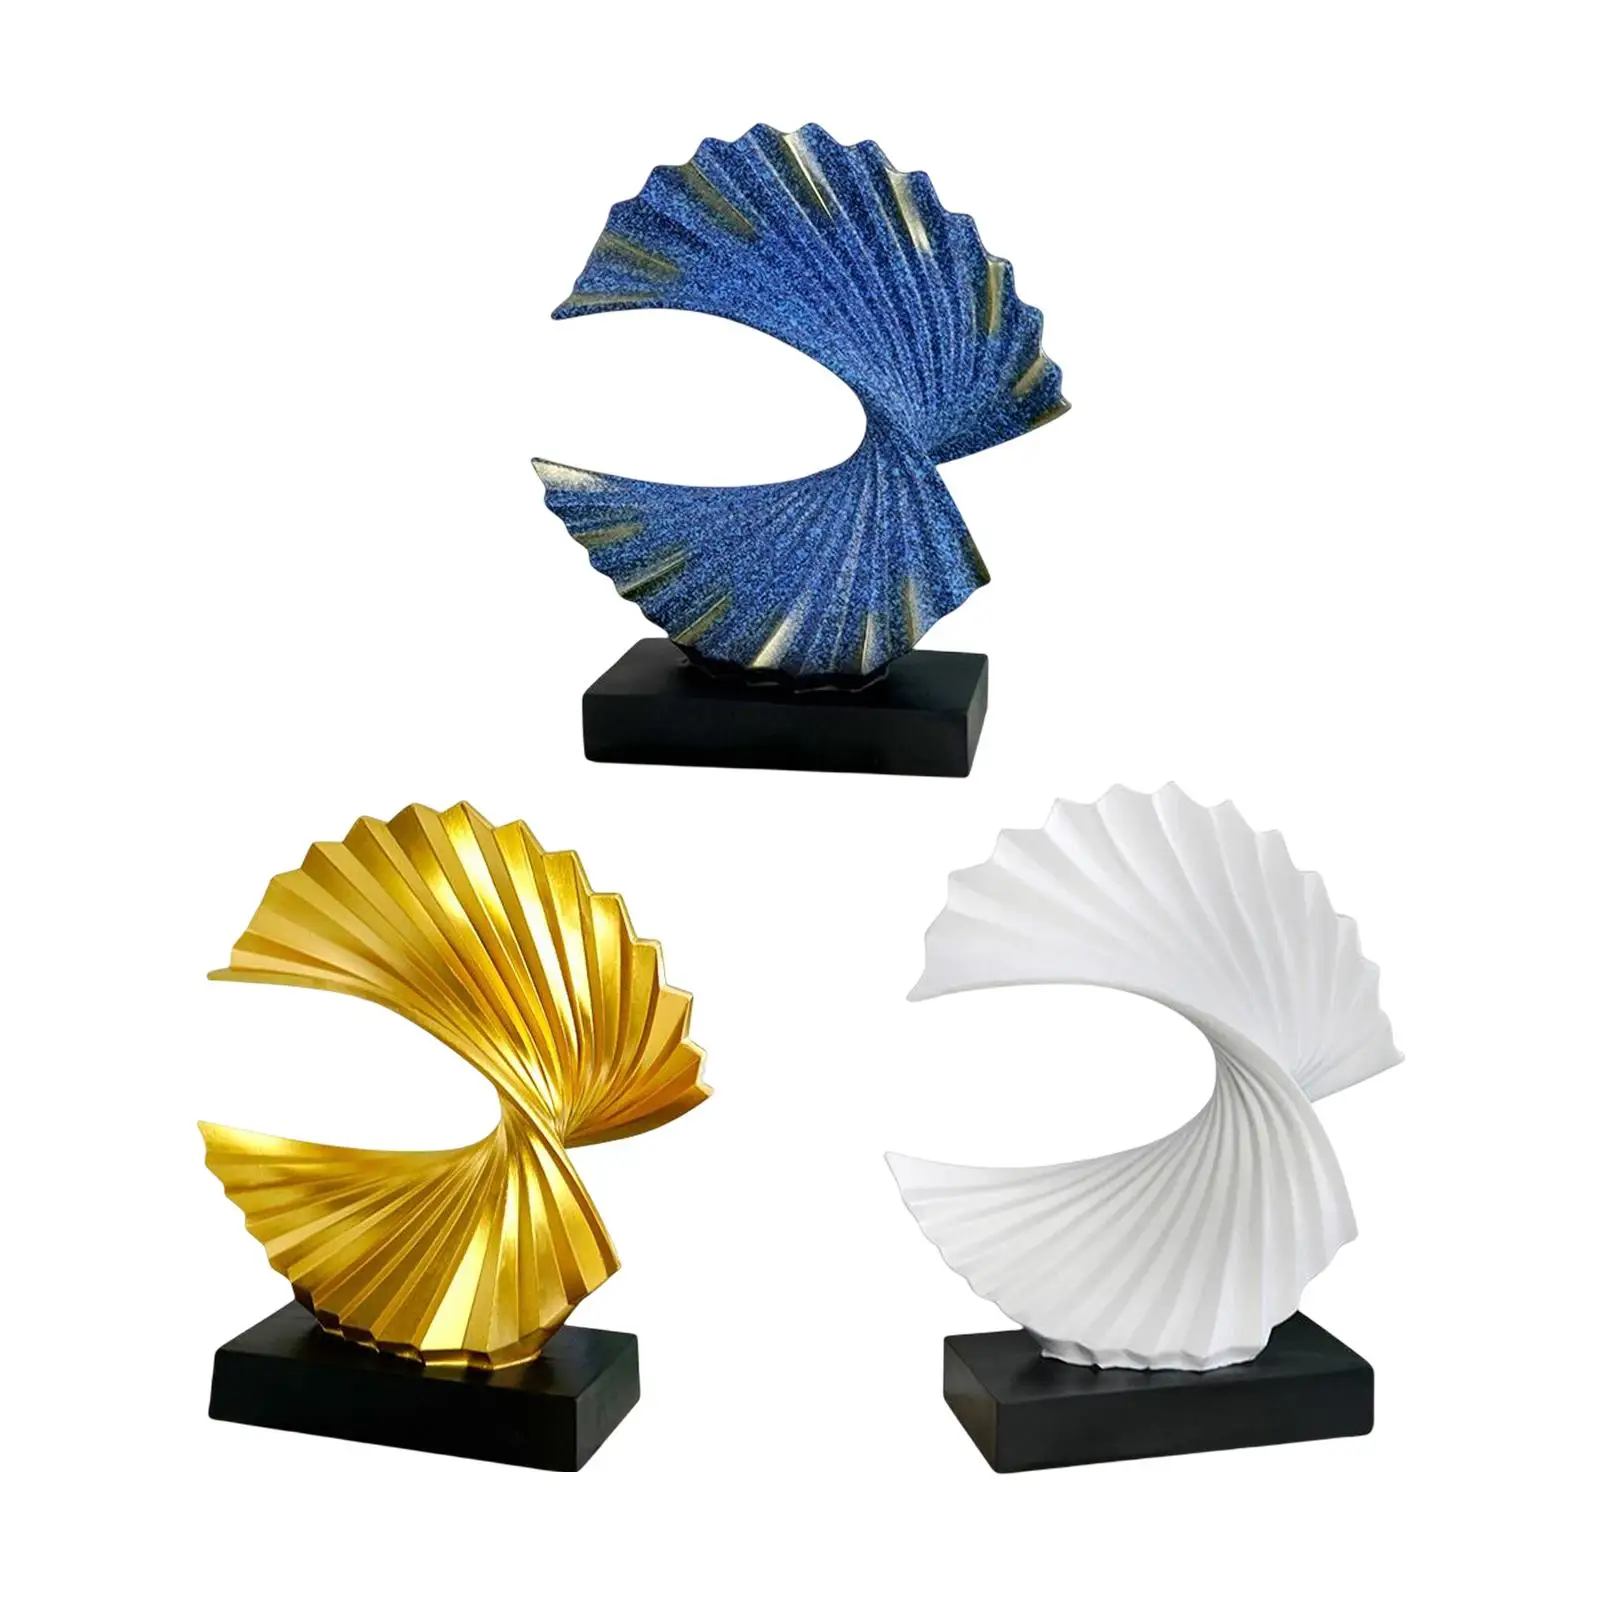 Home Ornament Fan Resin Sculpture Statuette Classical Stylish Gift Art Crafts Statue for Table Shelf Living Room Decor